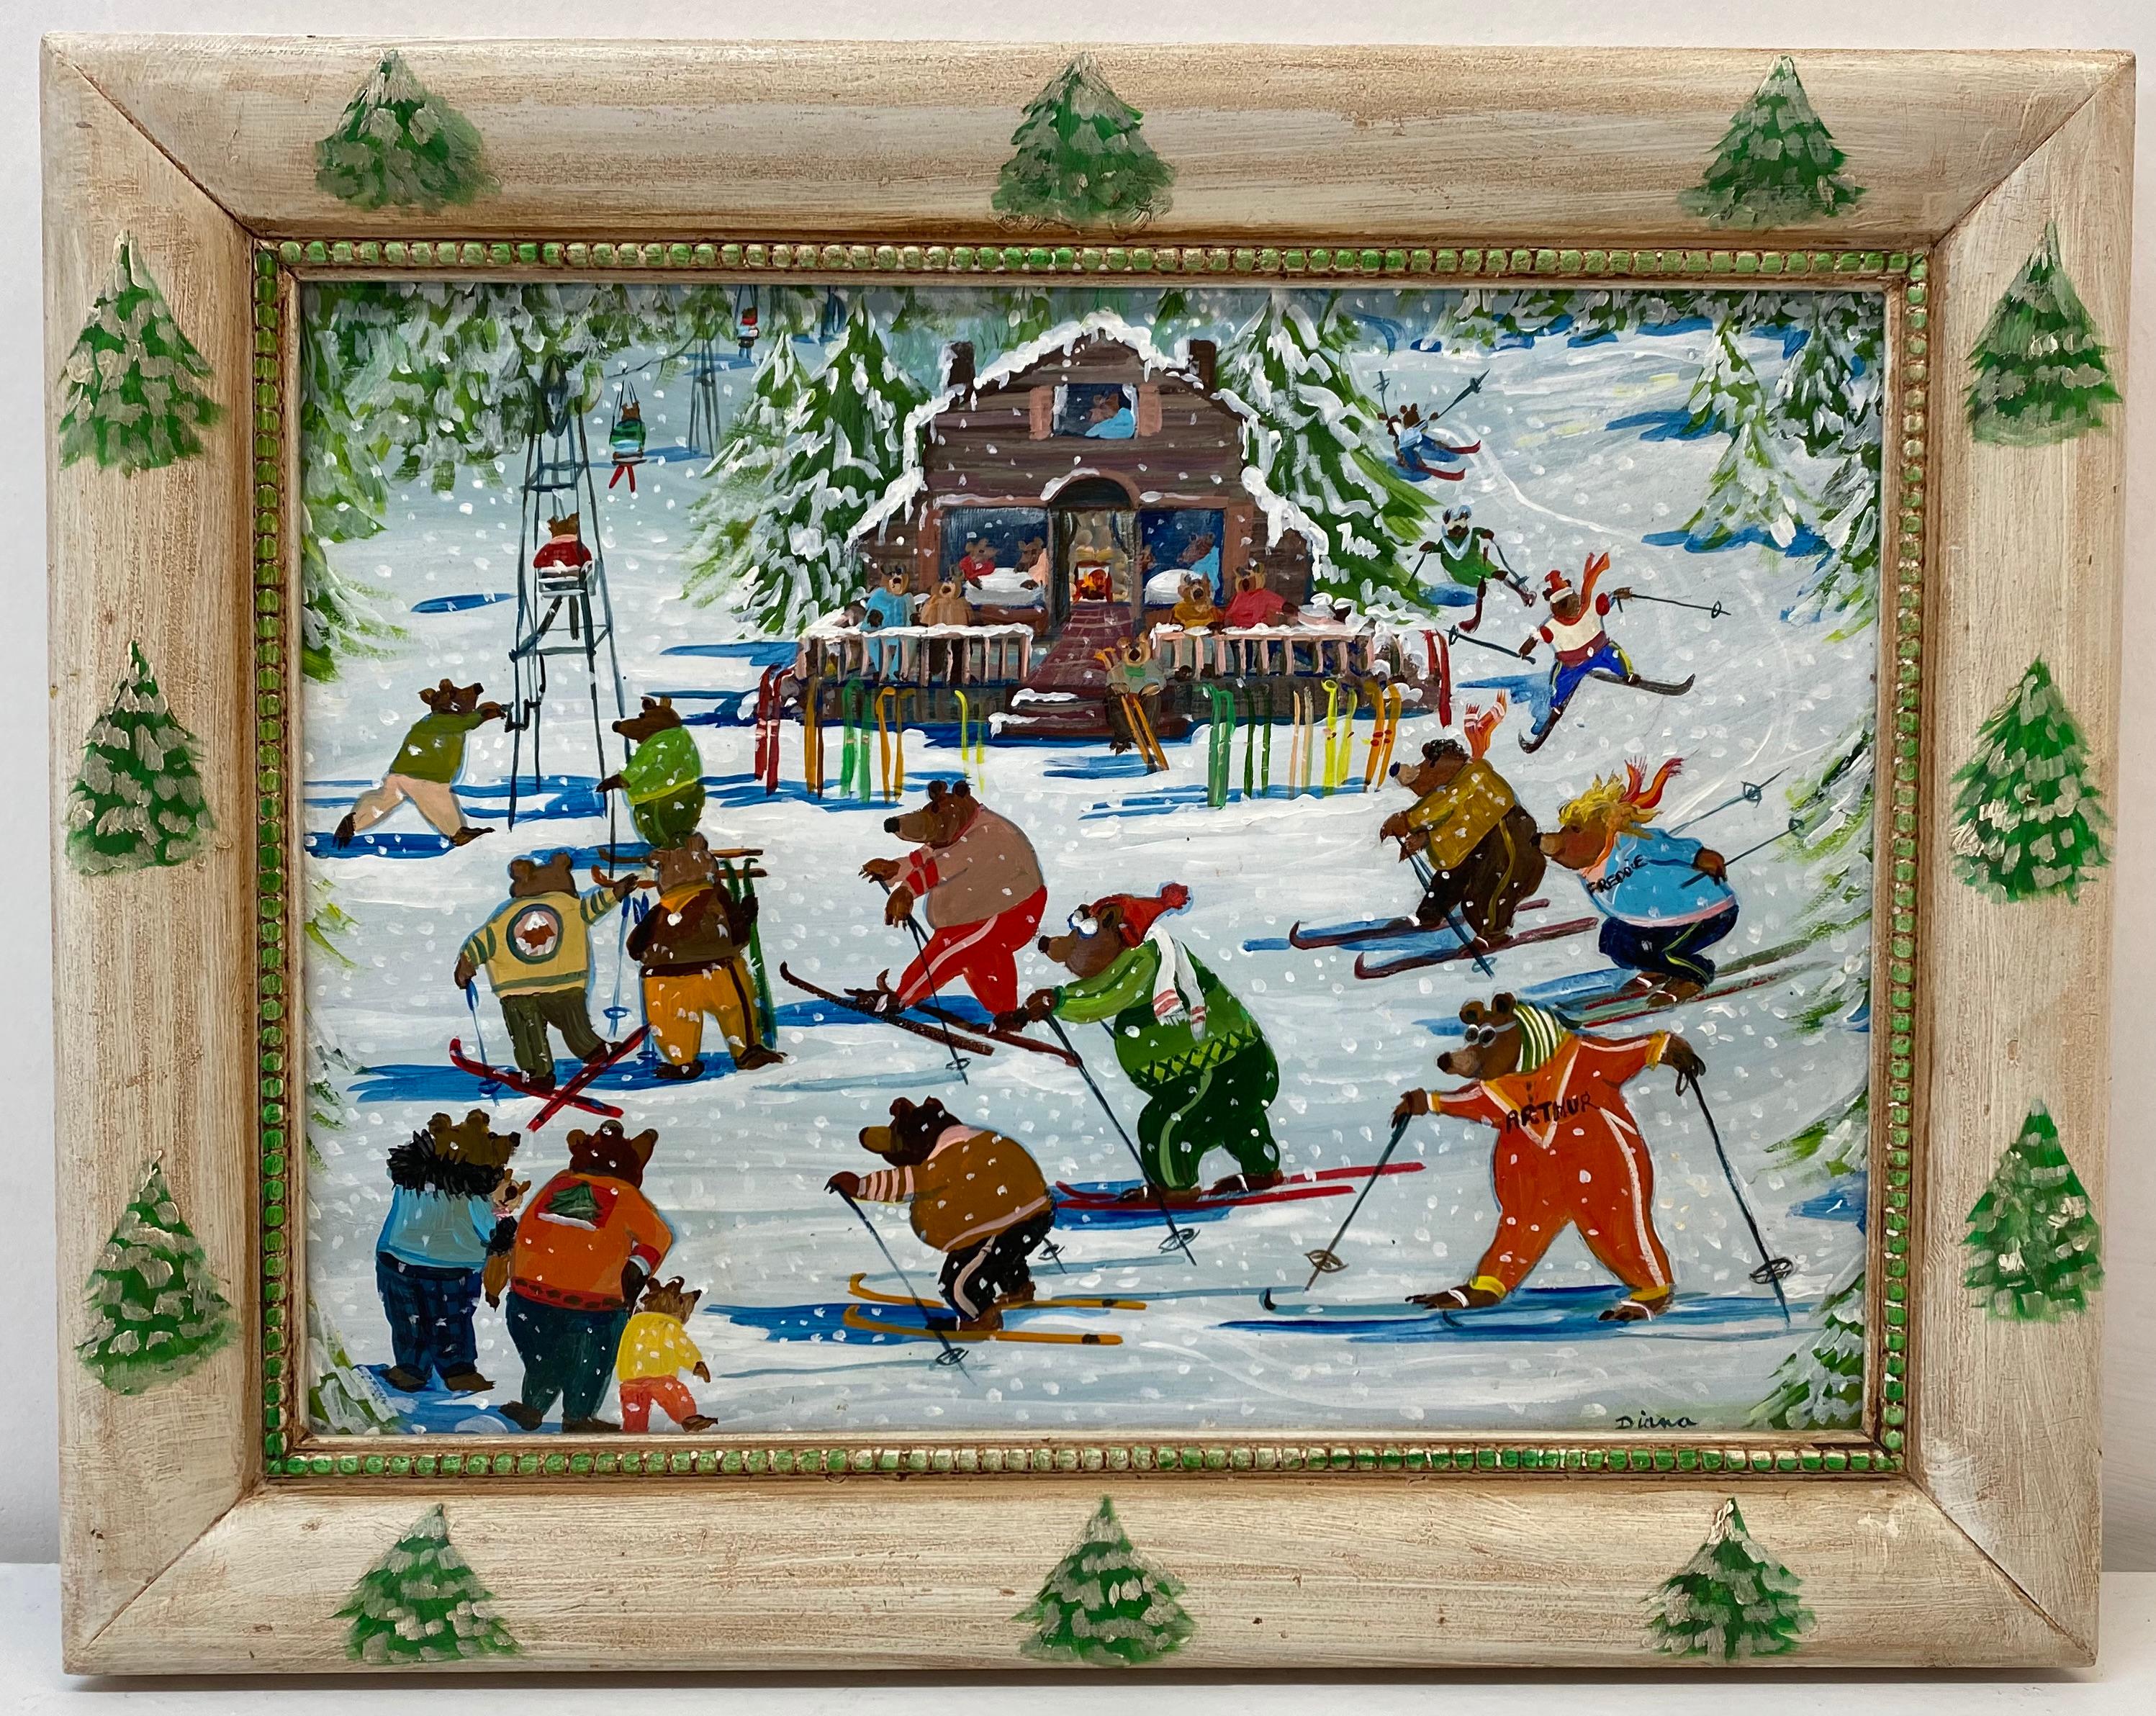 Unknown Landscape Painting - Vintage Folk Art Bears on the Slopes Original Oil Painting 20th C.